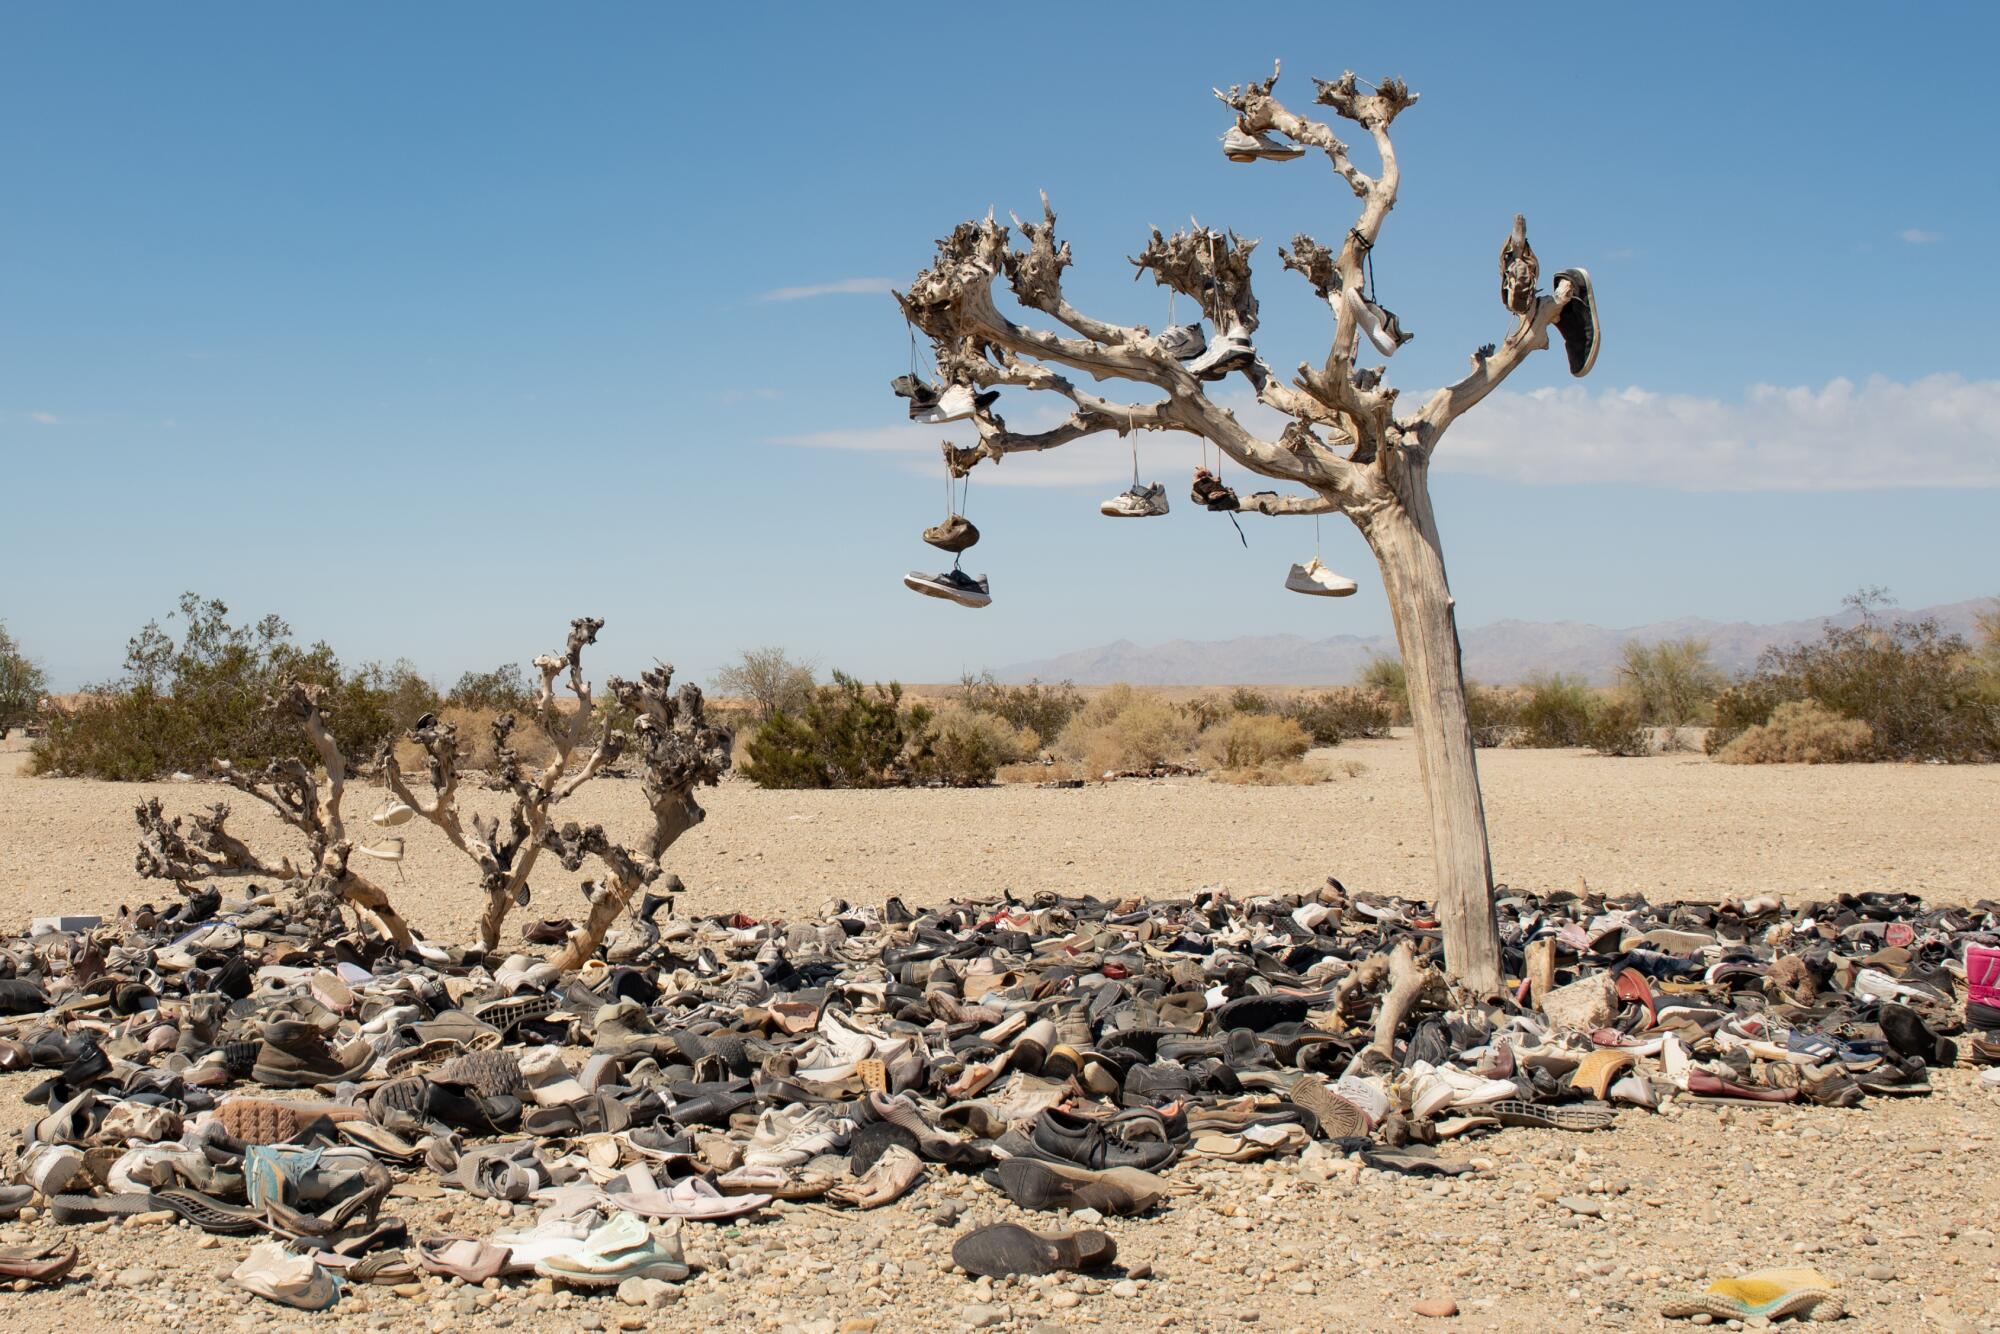 A tree with shoes hanging from its branches. Hundreds more shoes are on the ground below it.